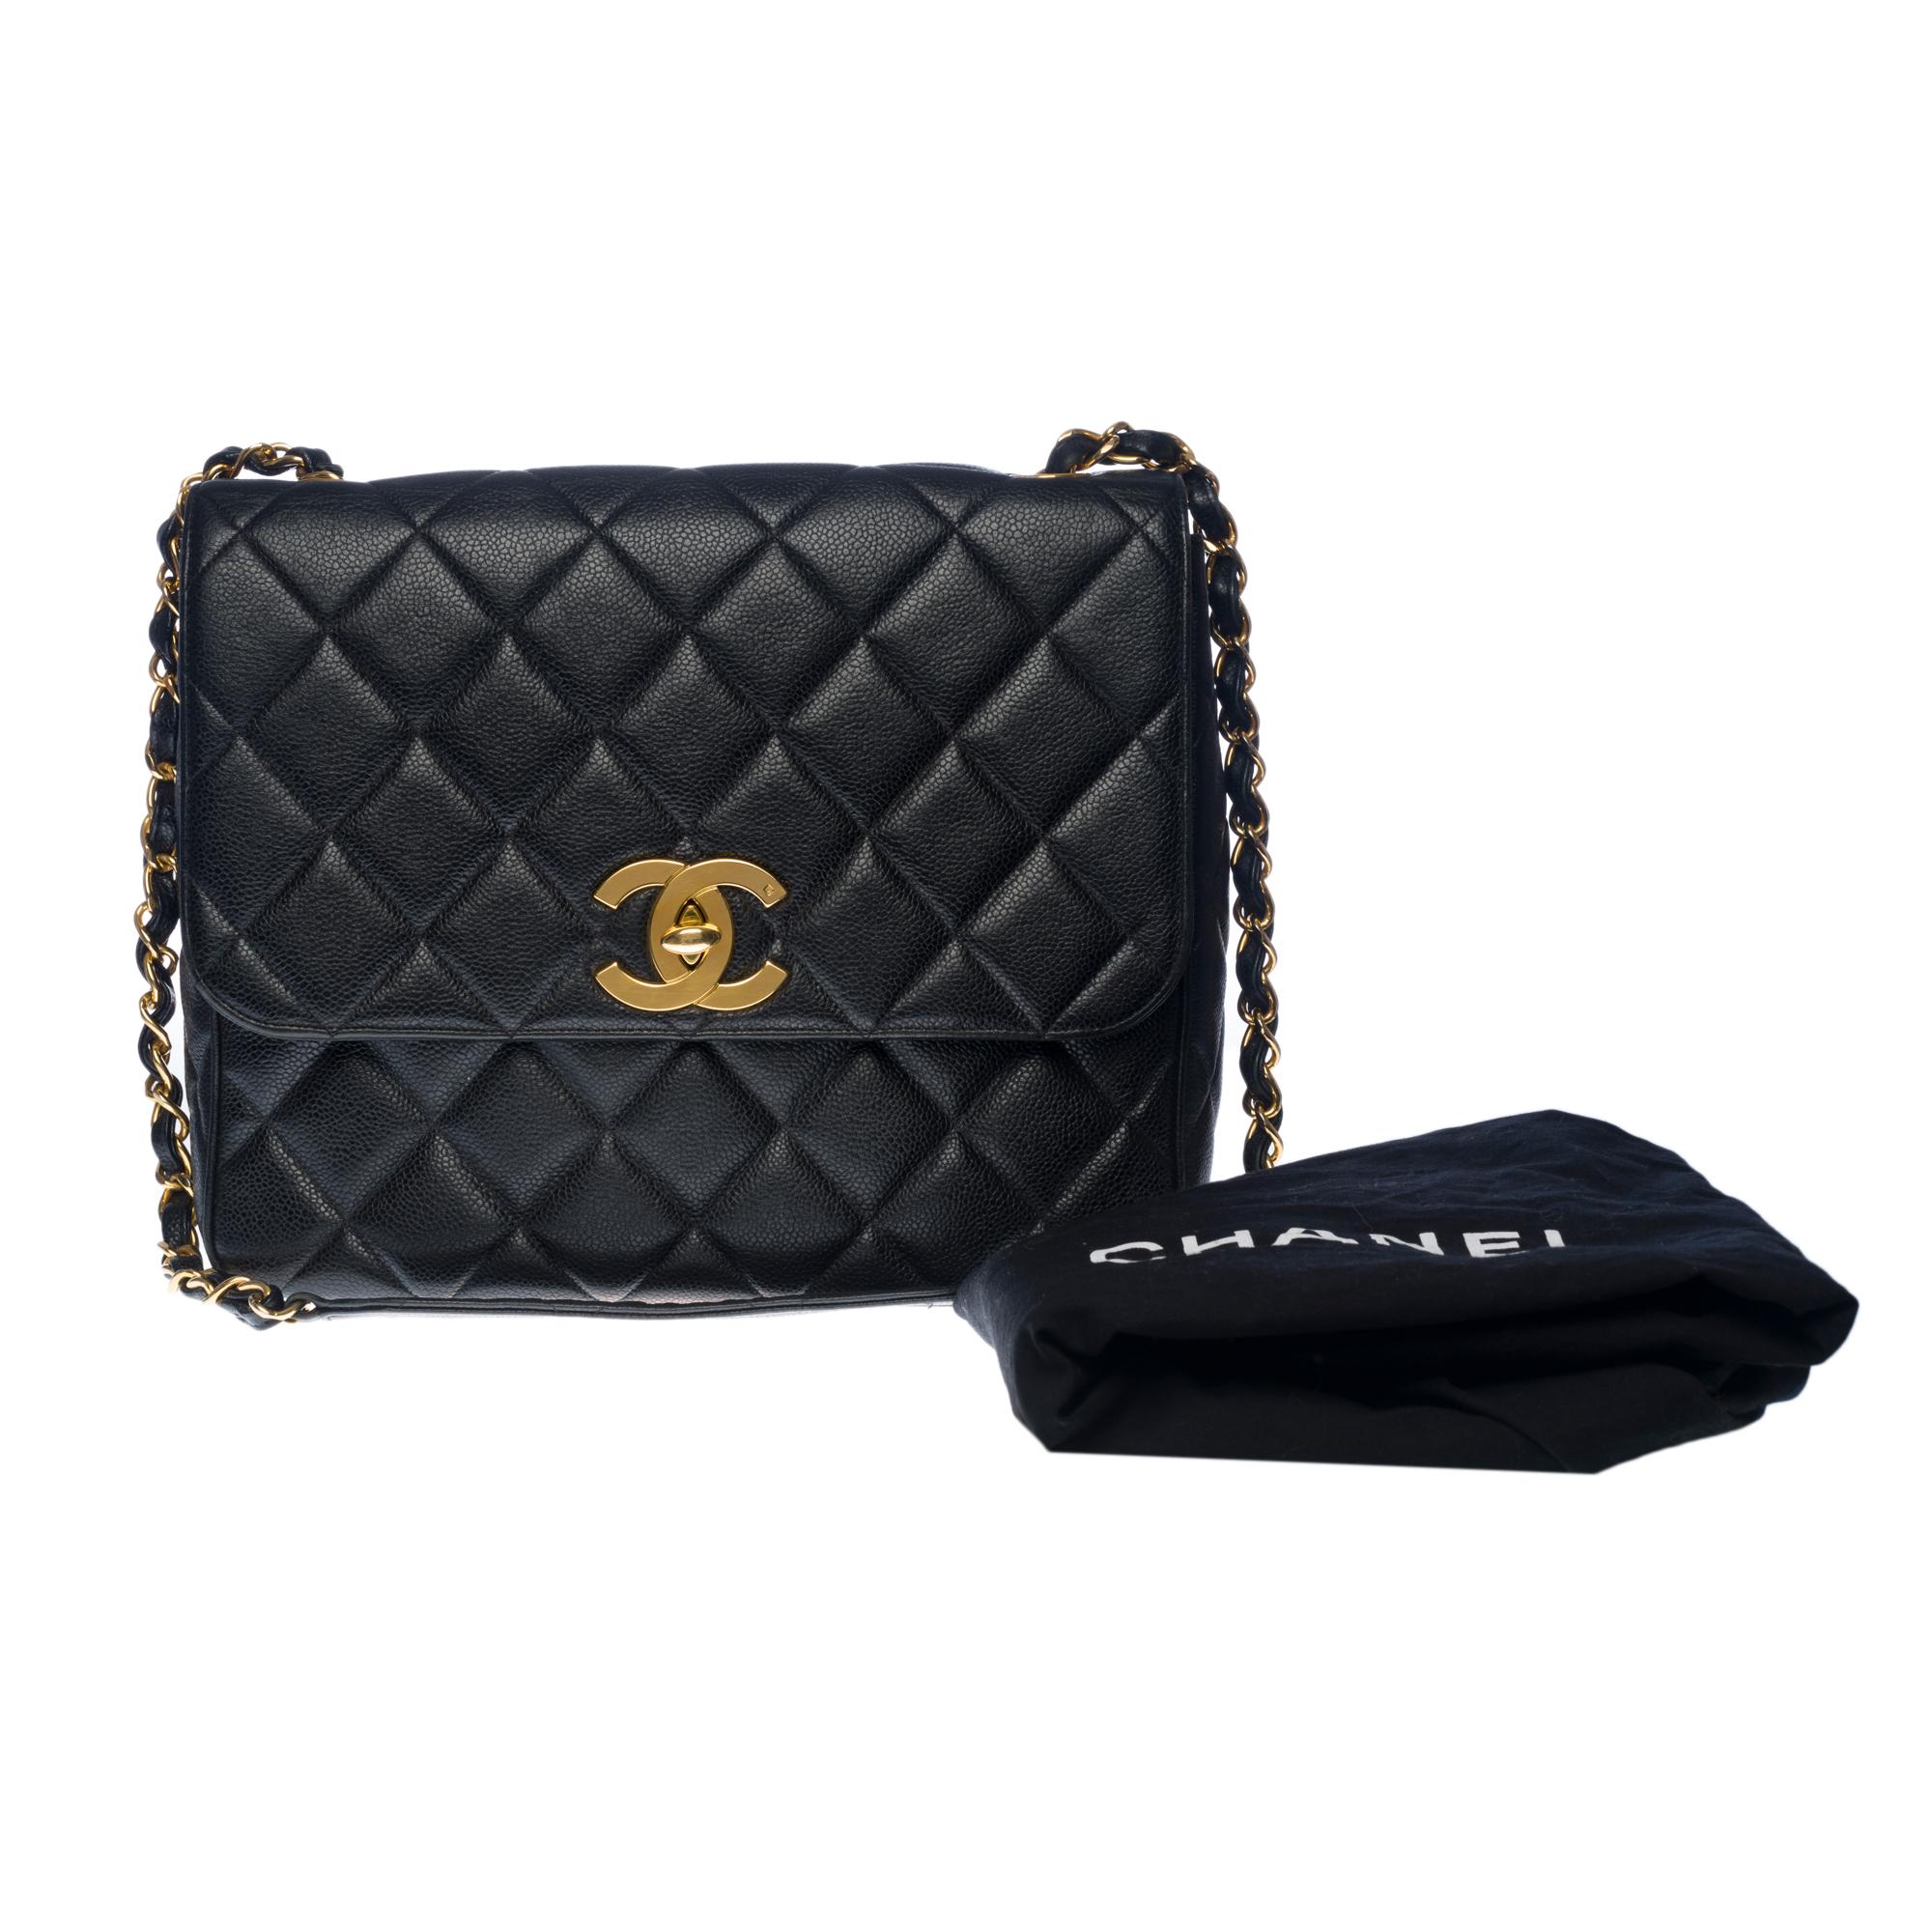 Rare Chanel Maxi shoulder flap bag in black caviar quilted leather, GHW 7